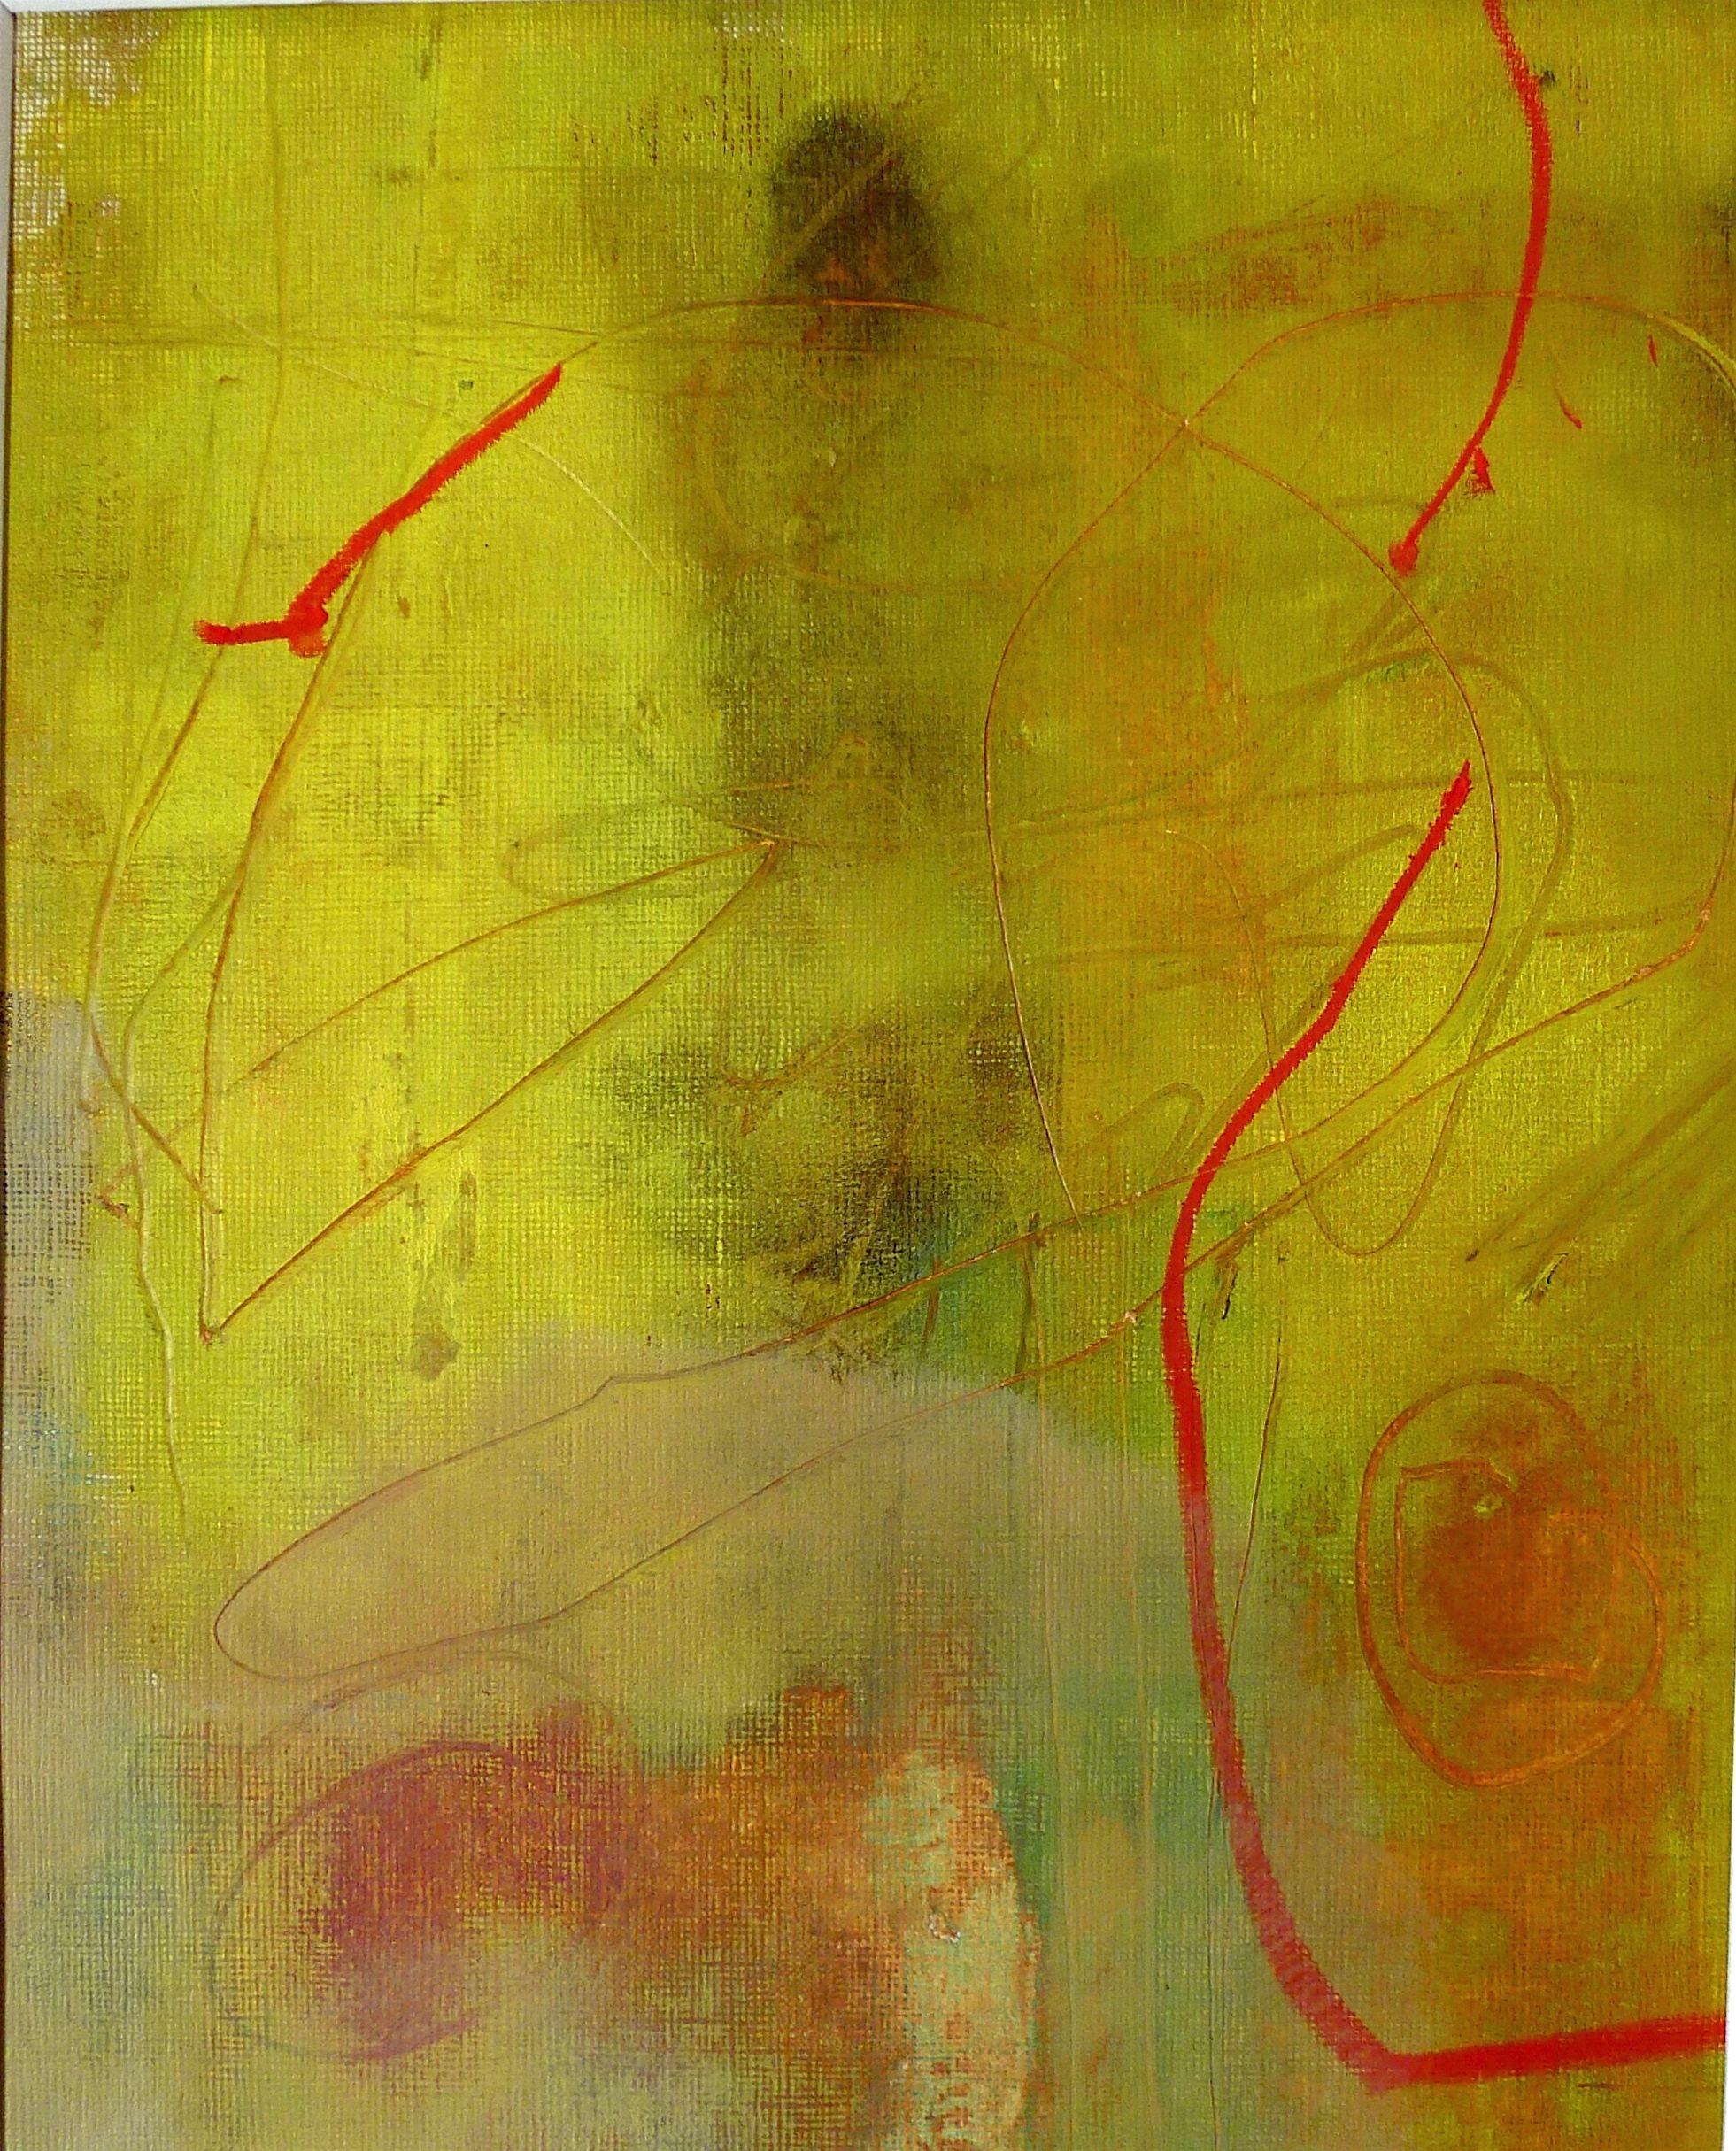 BREAKTHROUGH, Mixed Media on Paper - Mixed Media Art by Susan Ulrich